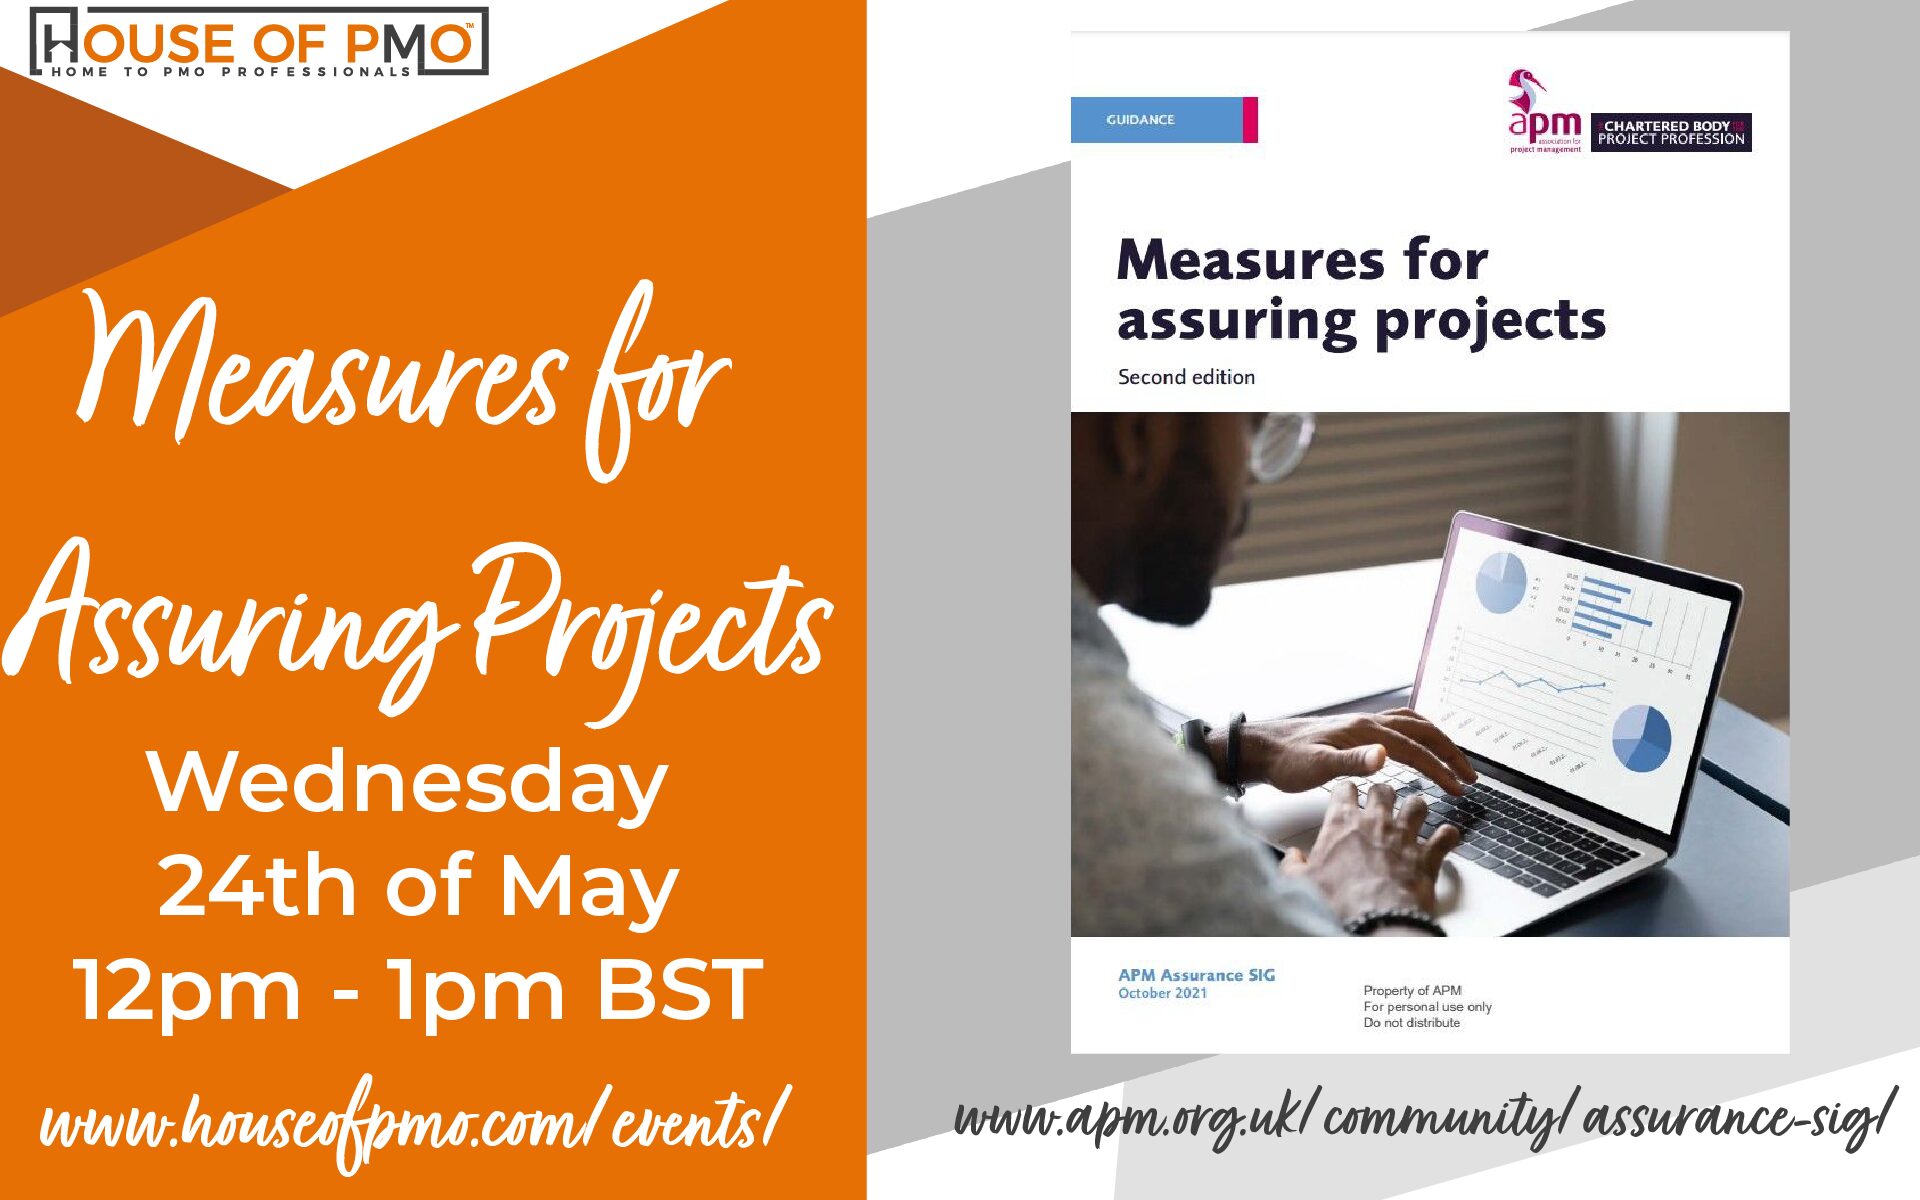 A picture for the event measures for assuring projects, happening 24th of May 12pm - 1pm. Includes an image of the book measures for assuring projects.